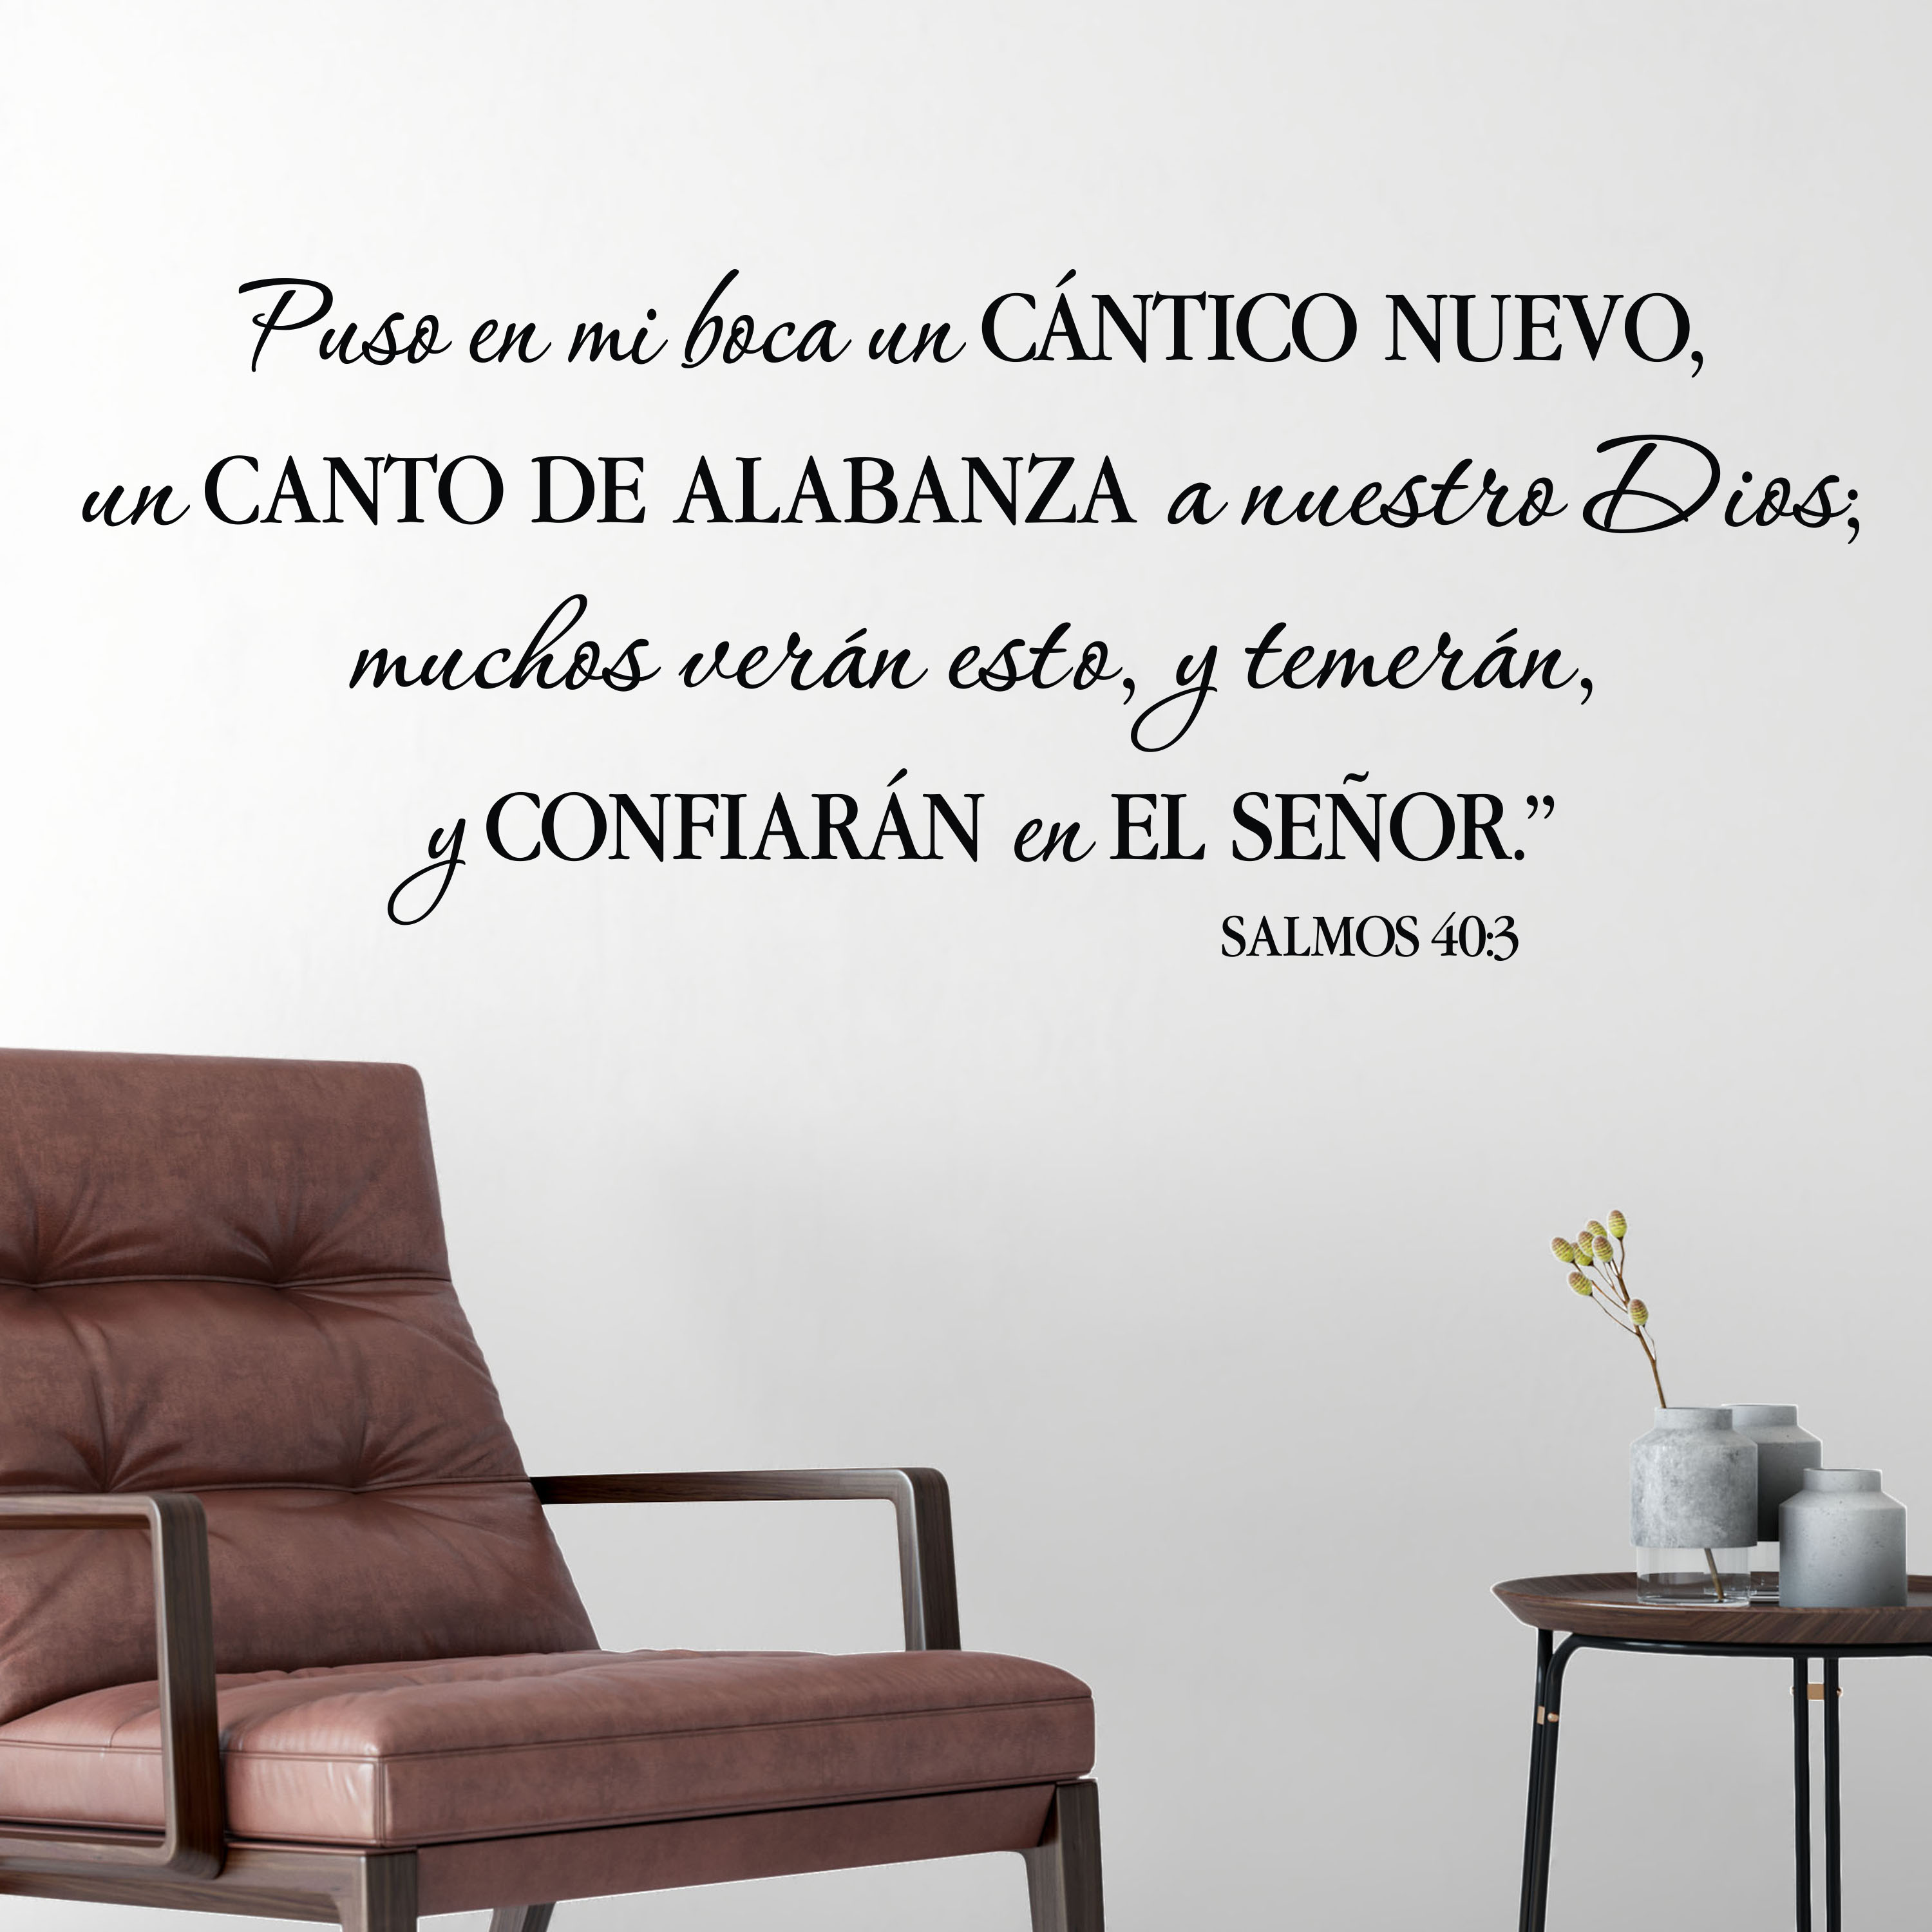 Psalm 403 Spanish Vinyl Wall Decal By Wild Eyes Signs Salmos 403 Puso En Mi Boca Un Cántico Nuevo He Put A New Song In My Mouth Spanish Scripture